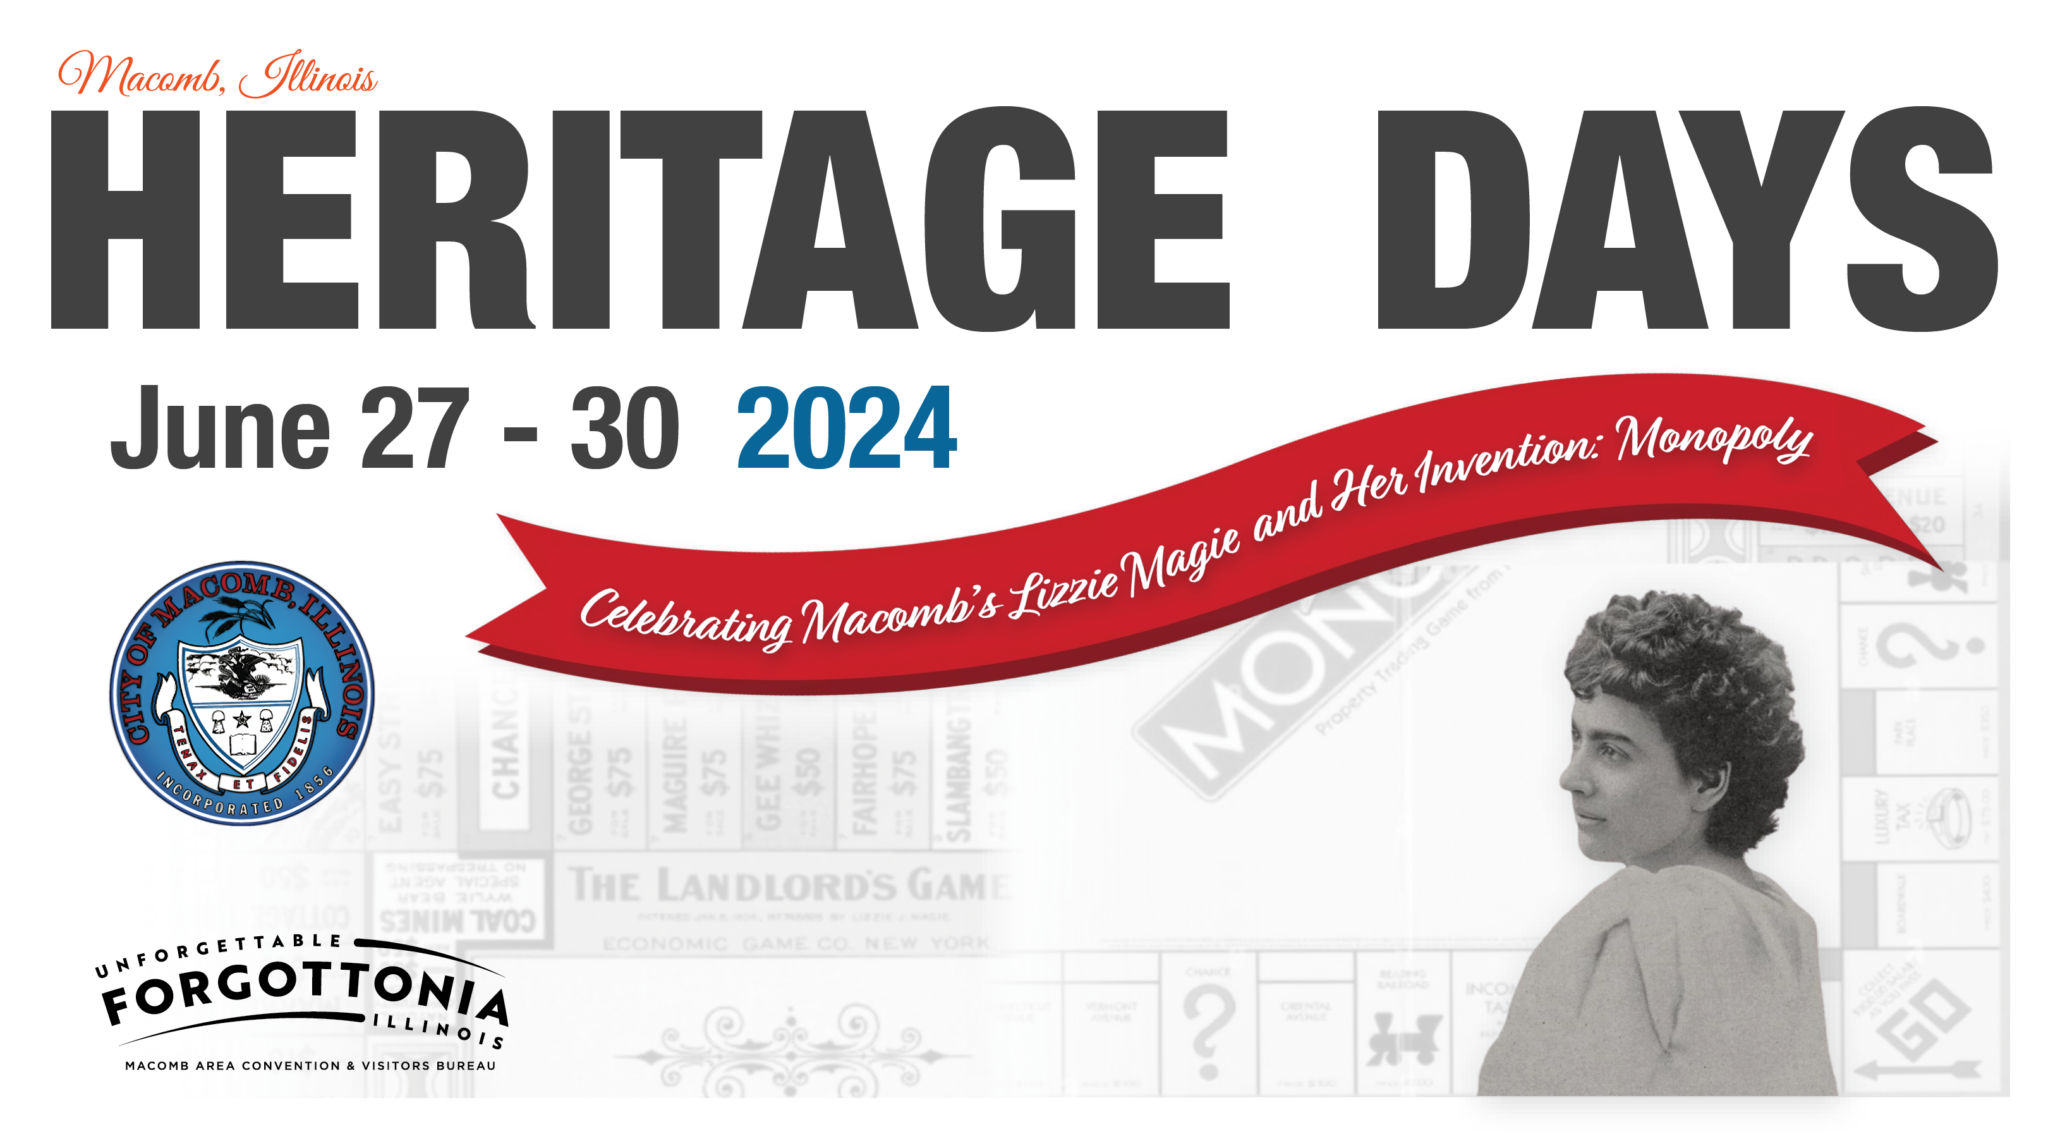 Heritage Days 2024 - Celebrating Macomb's Lizzie Magie and her invention: Monopoly